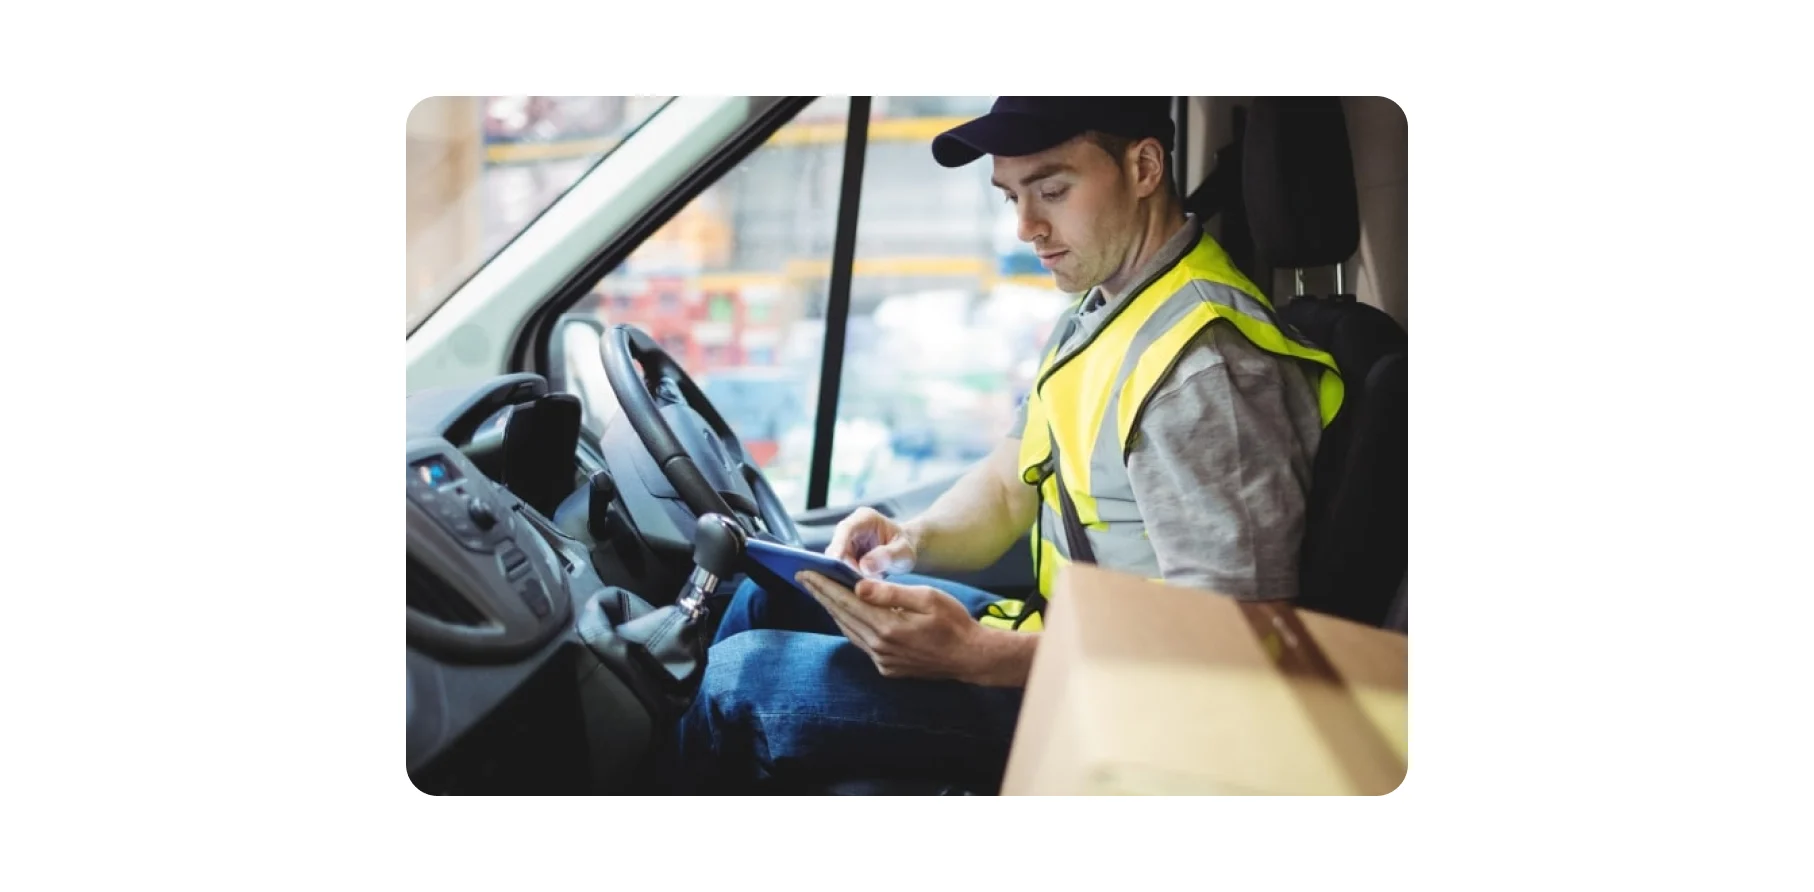 Delivery driver tracking deliveries